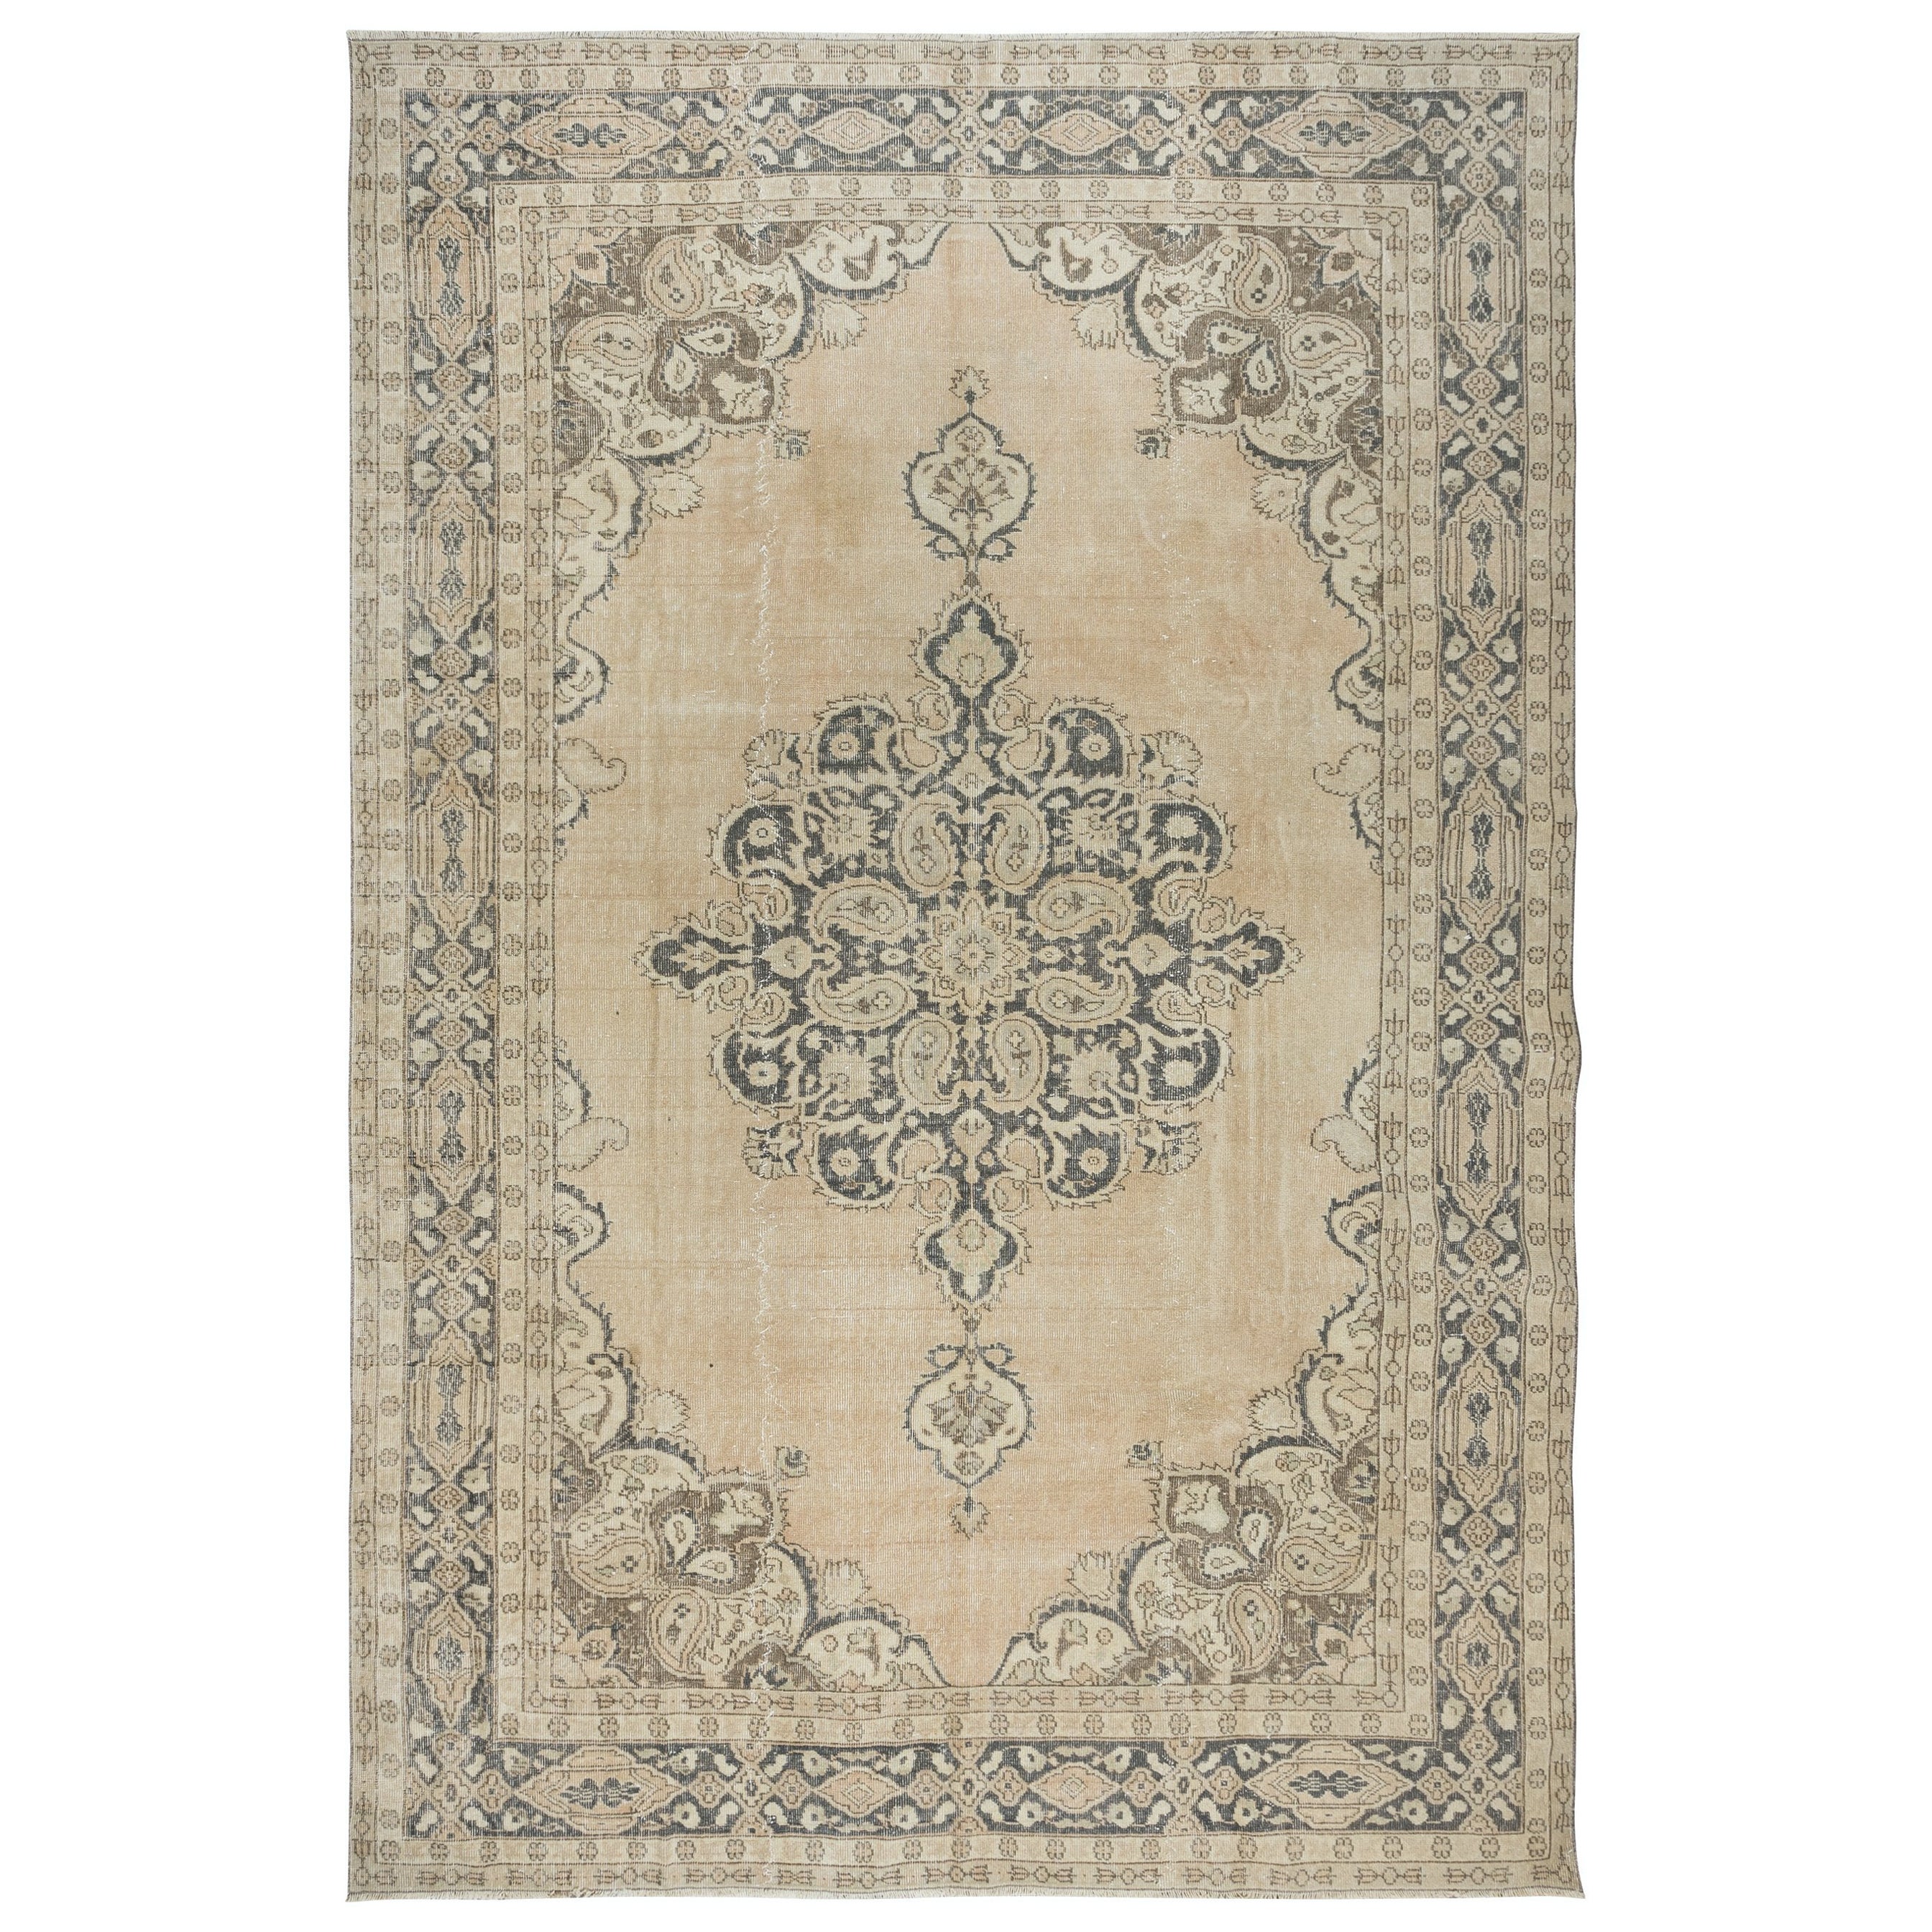 8.2x12 Ft Vintage Handmade Turkish Oushak Rug, Rustic Country House Style